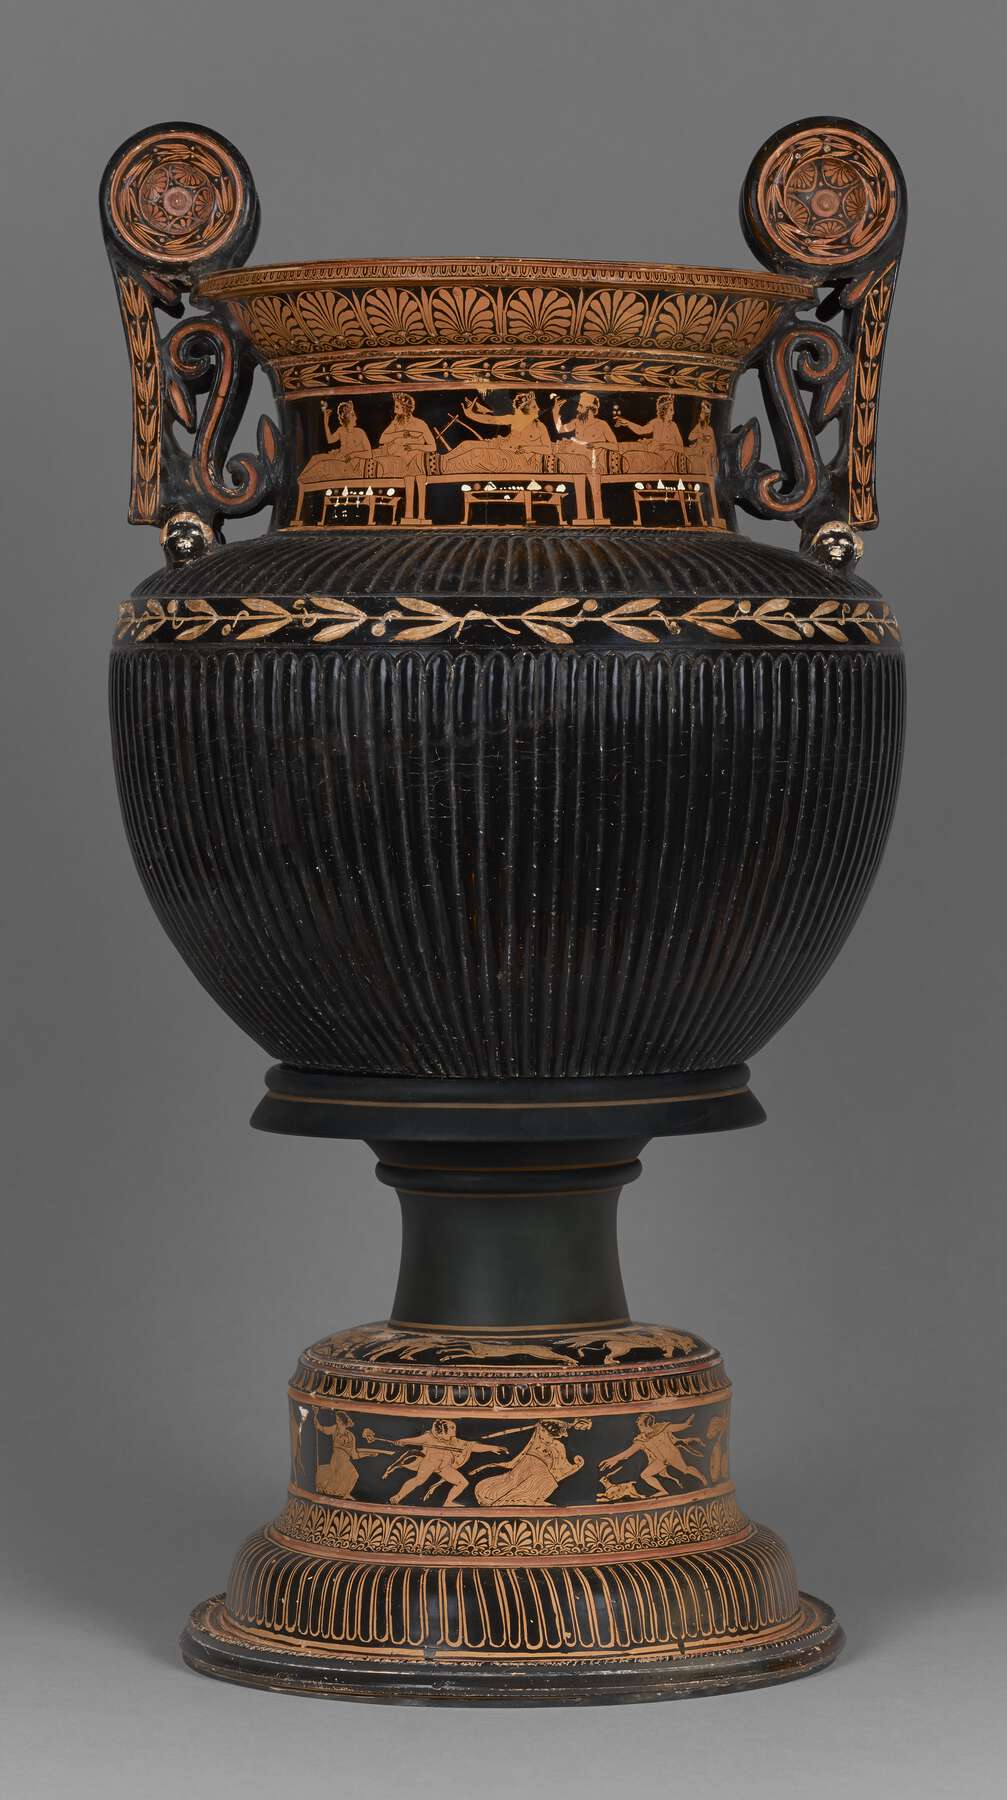 Another view of the highly decorated vase with ornate handles